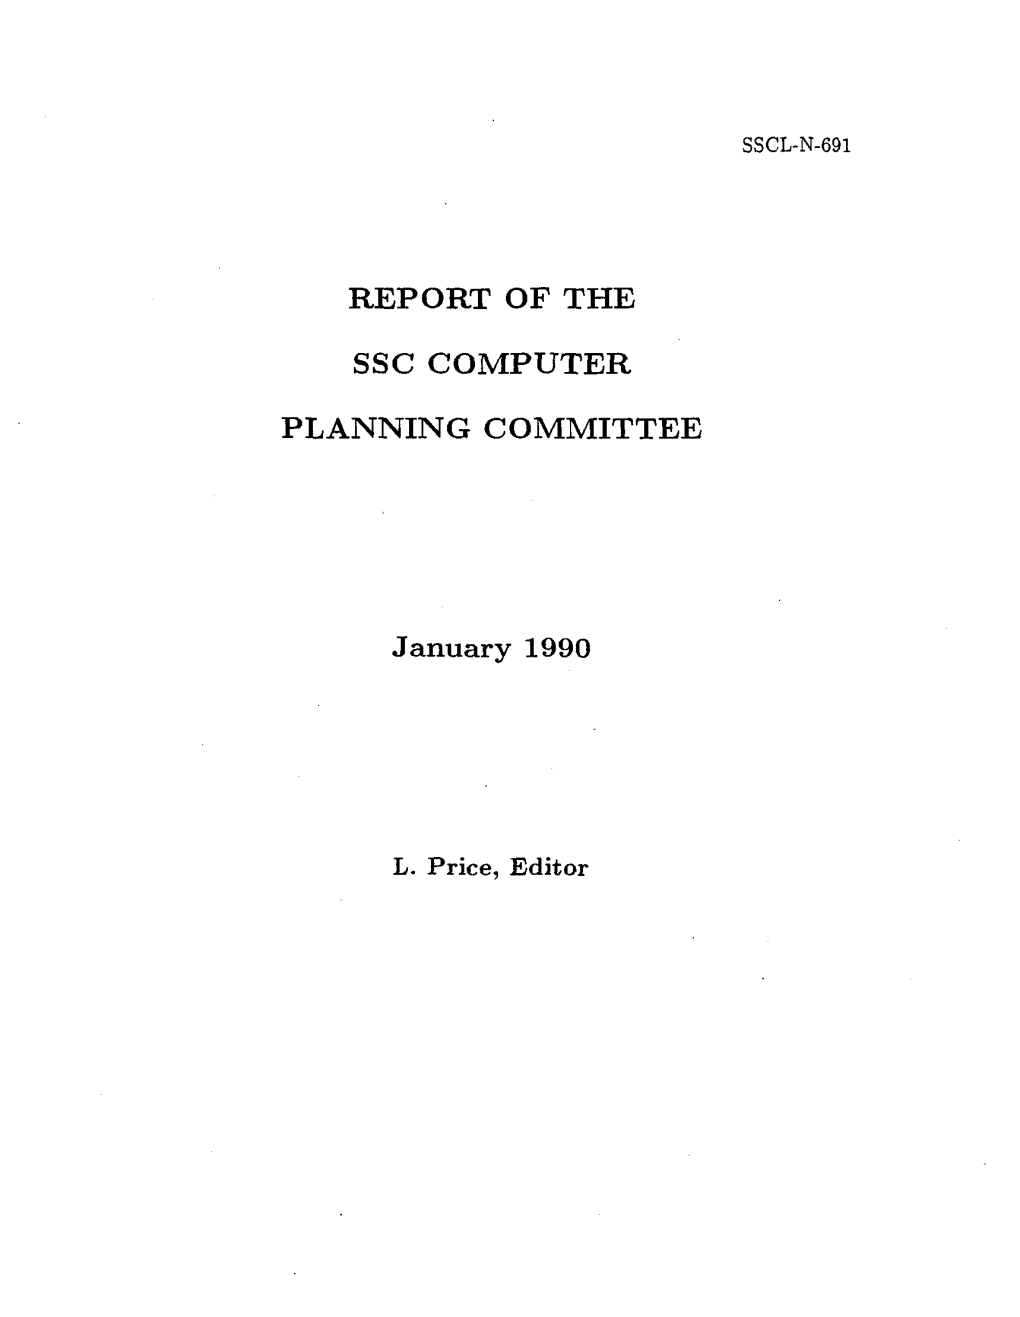 Report of the Ssc Computer Planning Committee